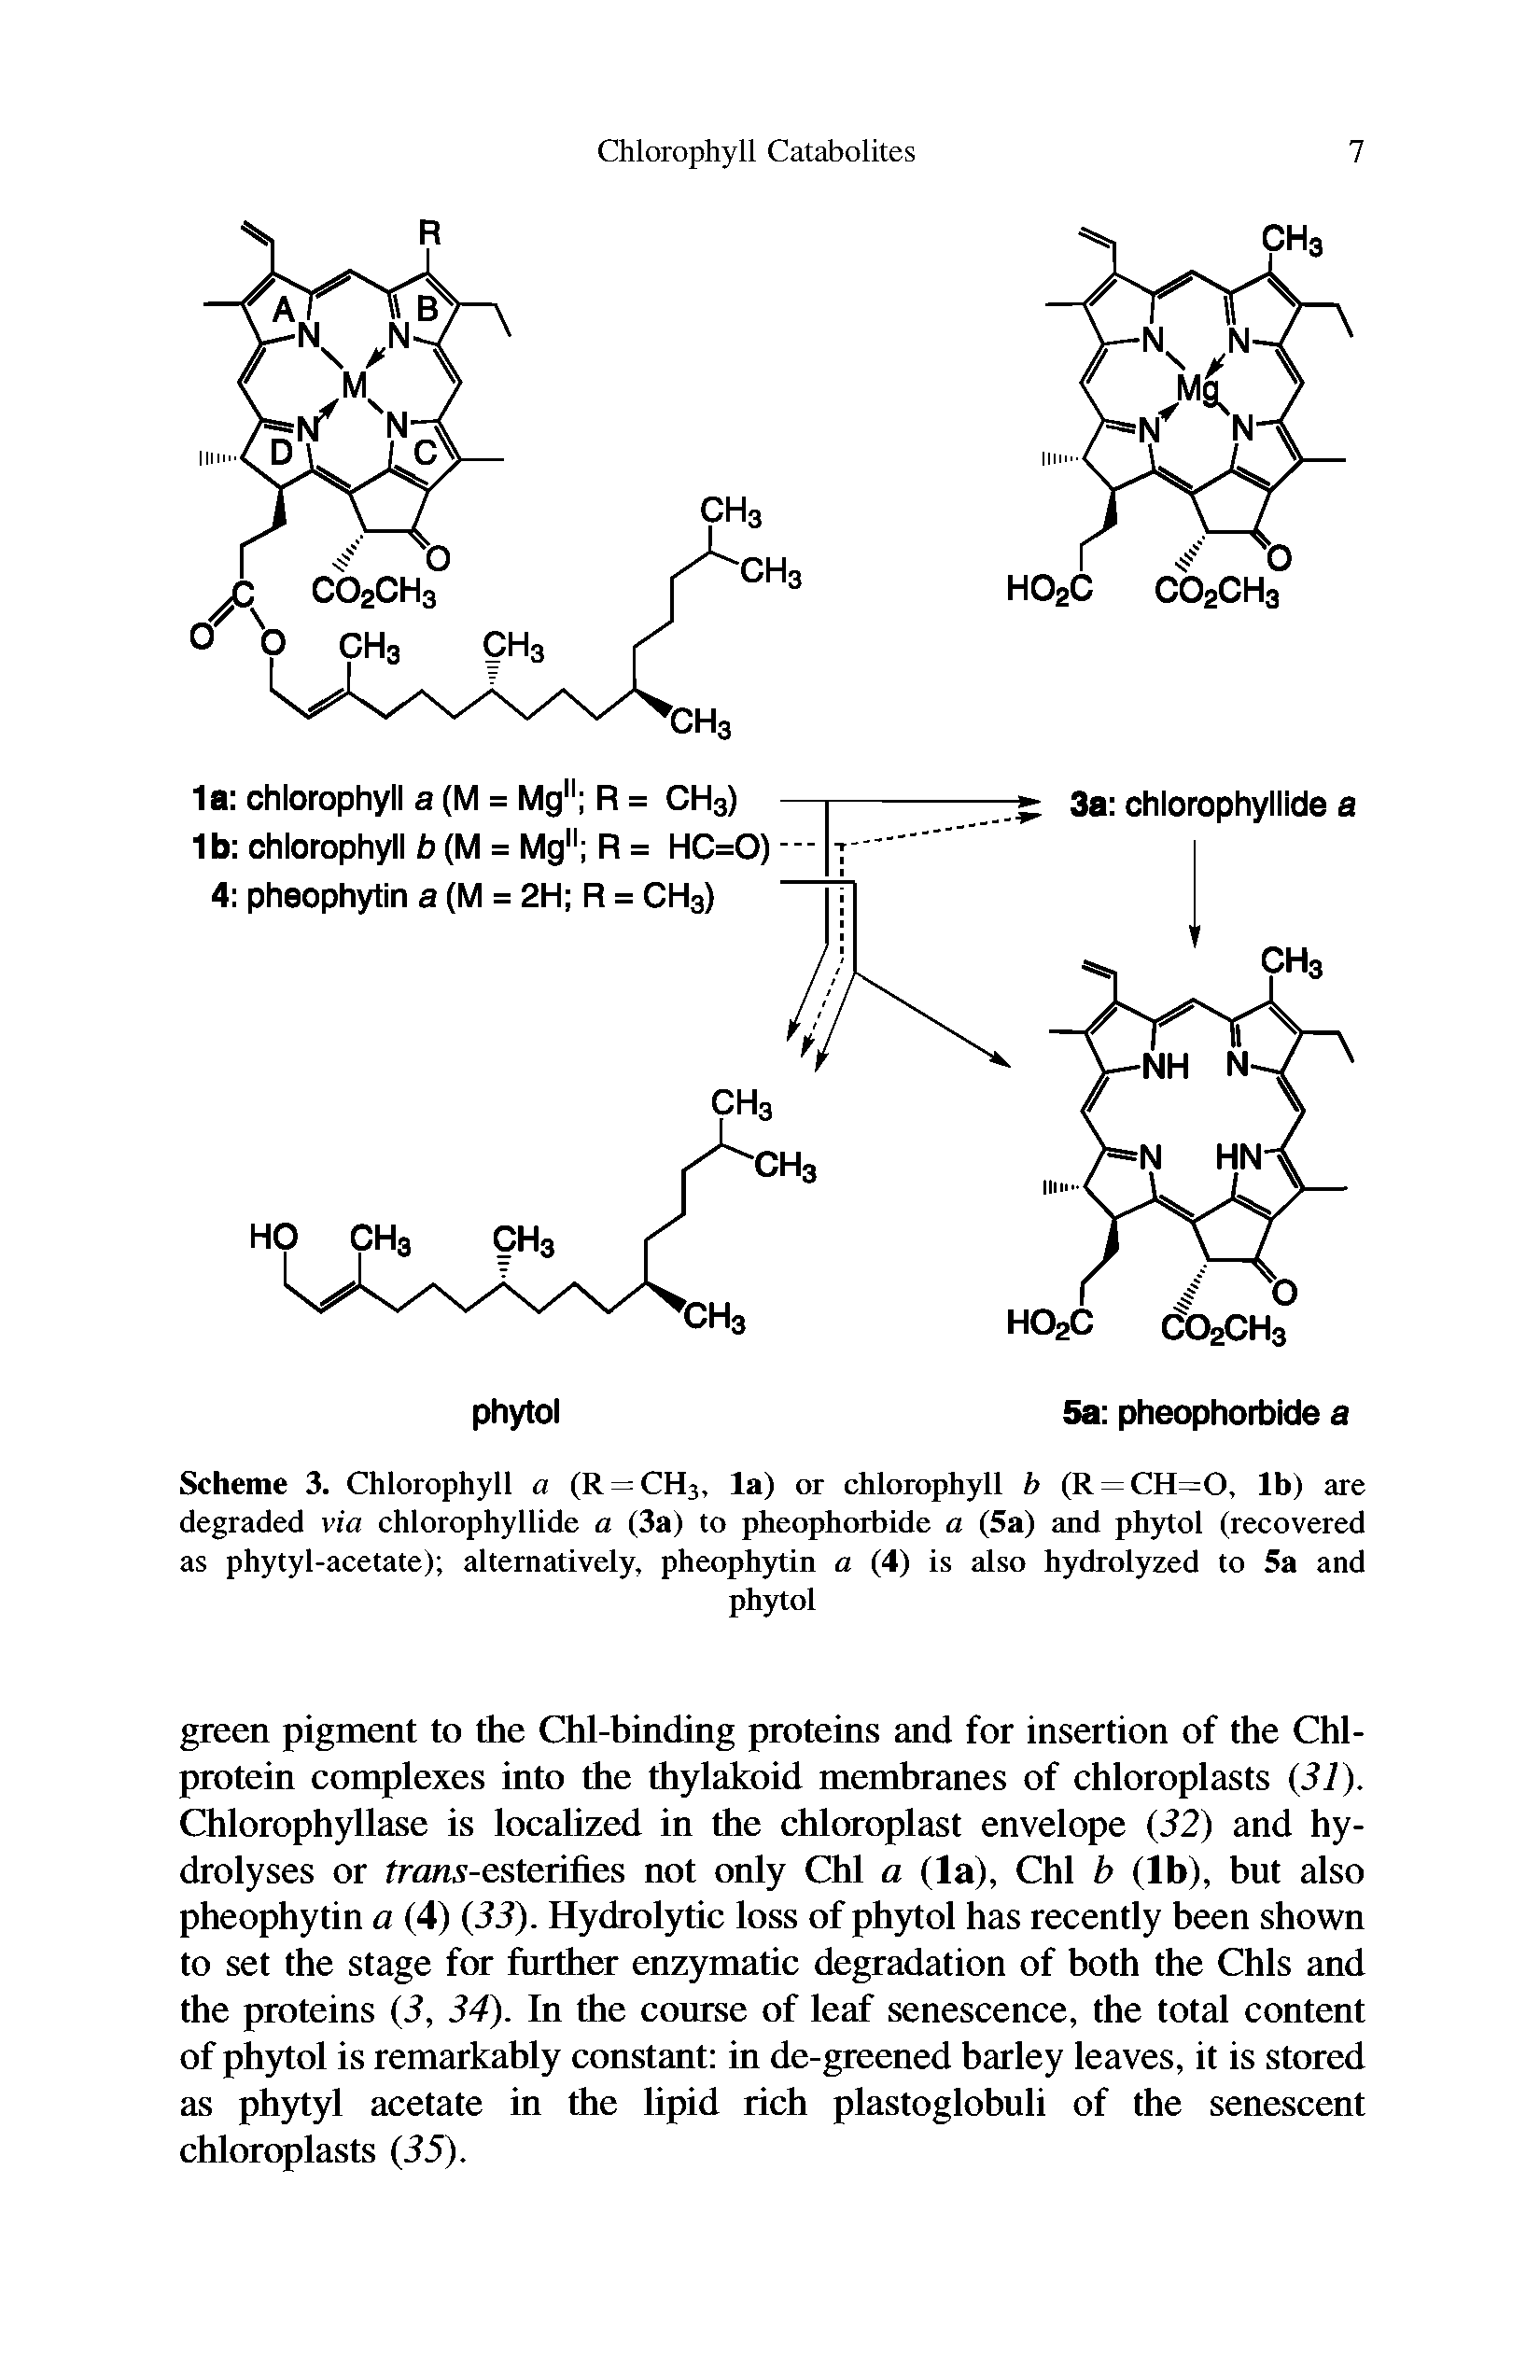 Scheme 3. Chlorophyll a (R = CH3, la) or chlorophyll b (R = CH=0, lb) are degraded via chlorophyllide a (3a) to pheophorbide a (5a) and phytol (recovered as phytyl-acetate) alternatively, pheophytin a (4) is also hydrolyzed to 5a and...